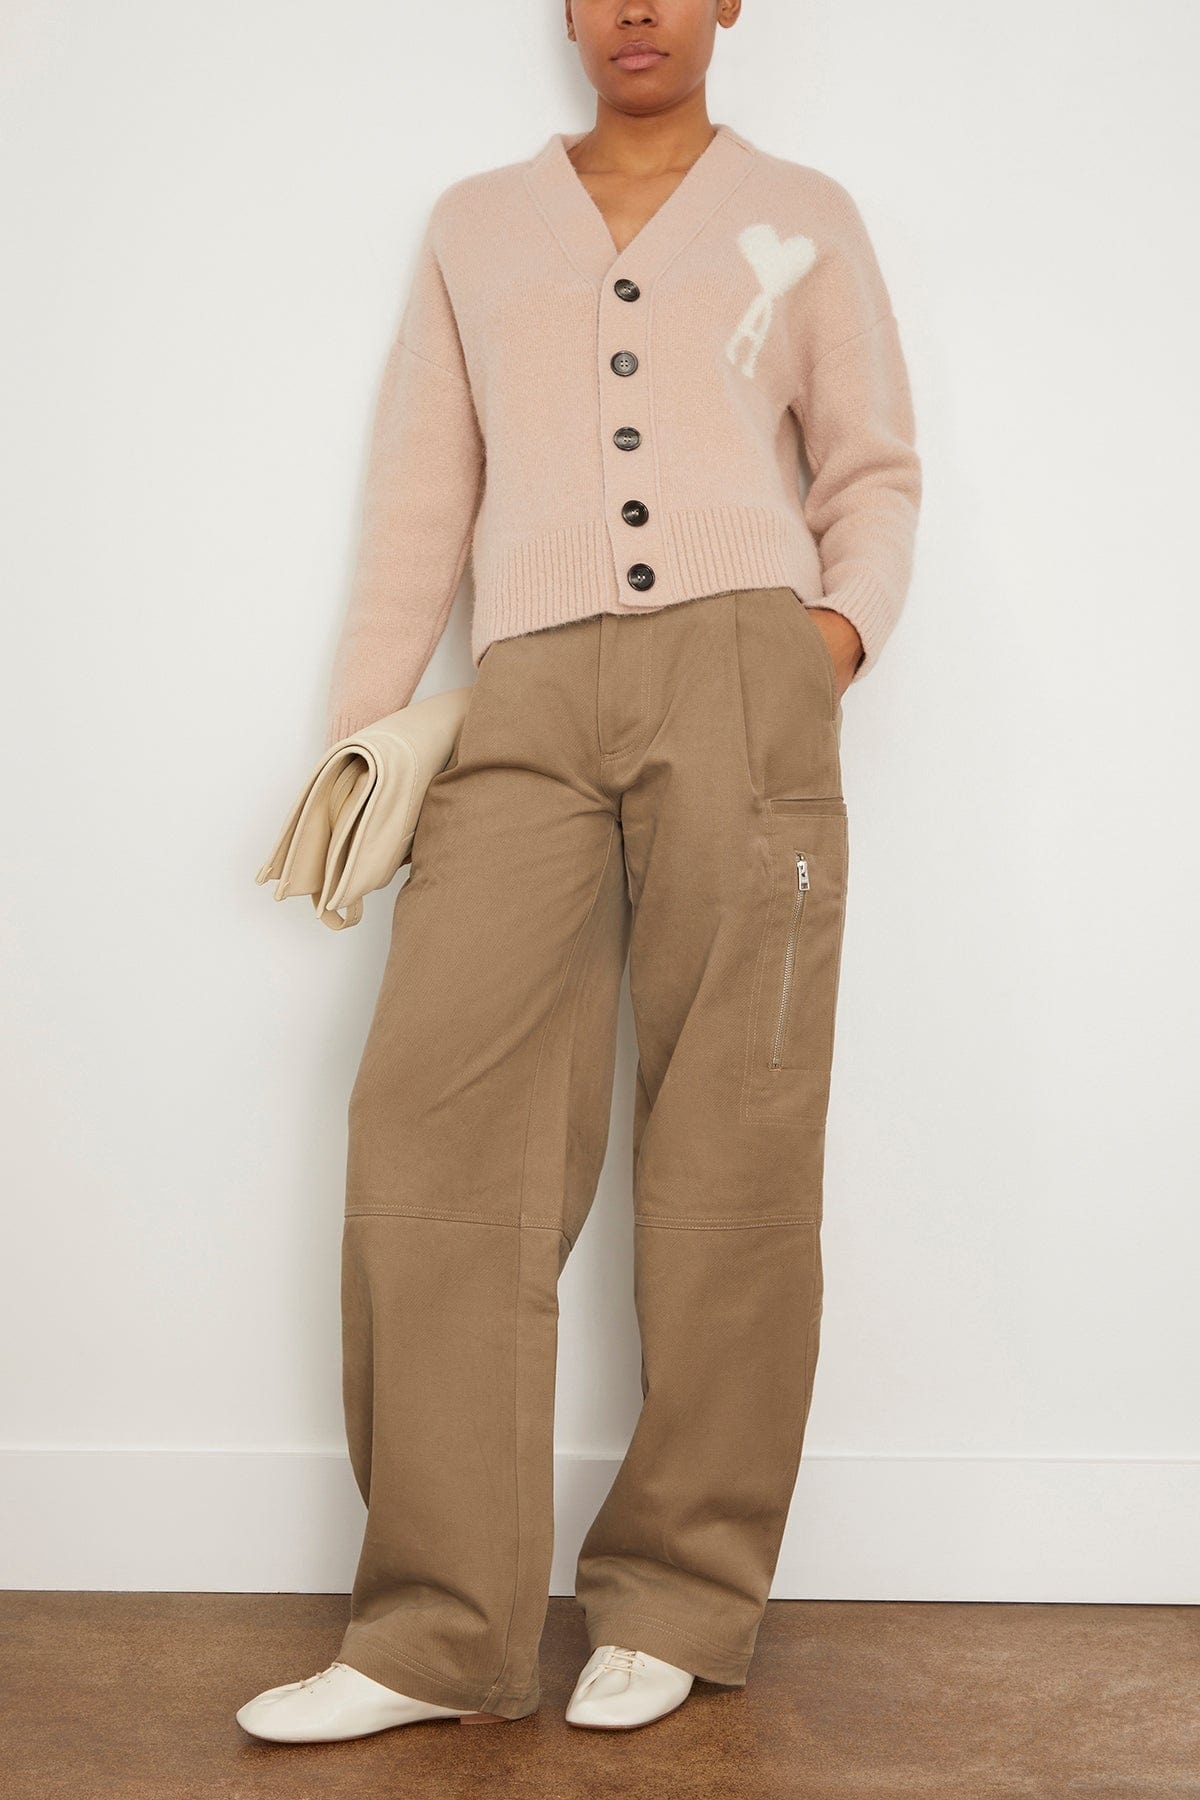 Off White ADC Cardigan in Powder Pink/Ivory - 2